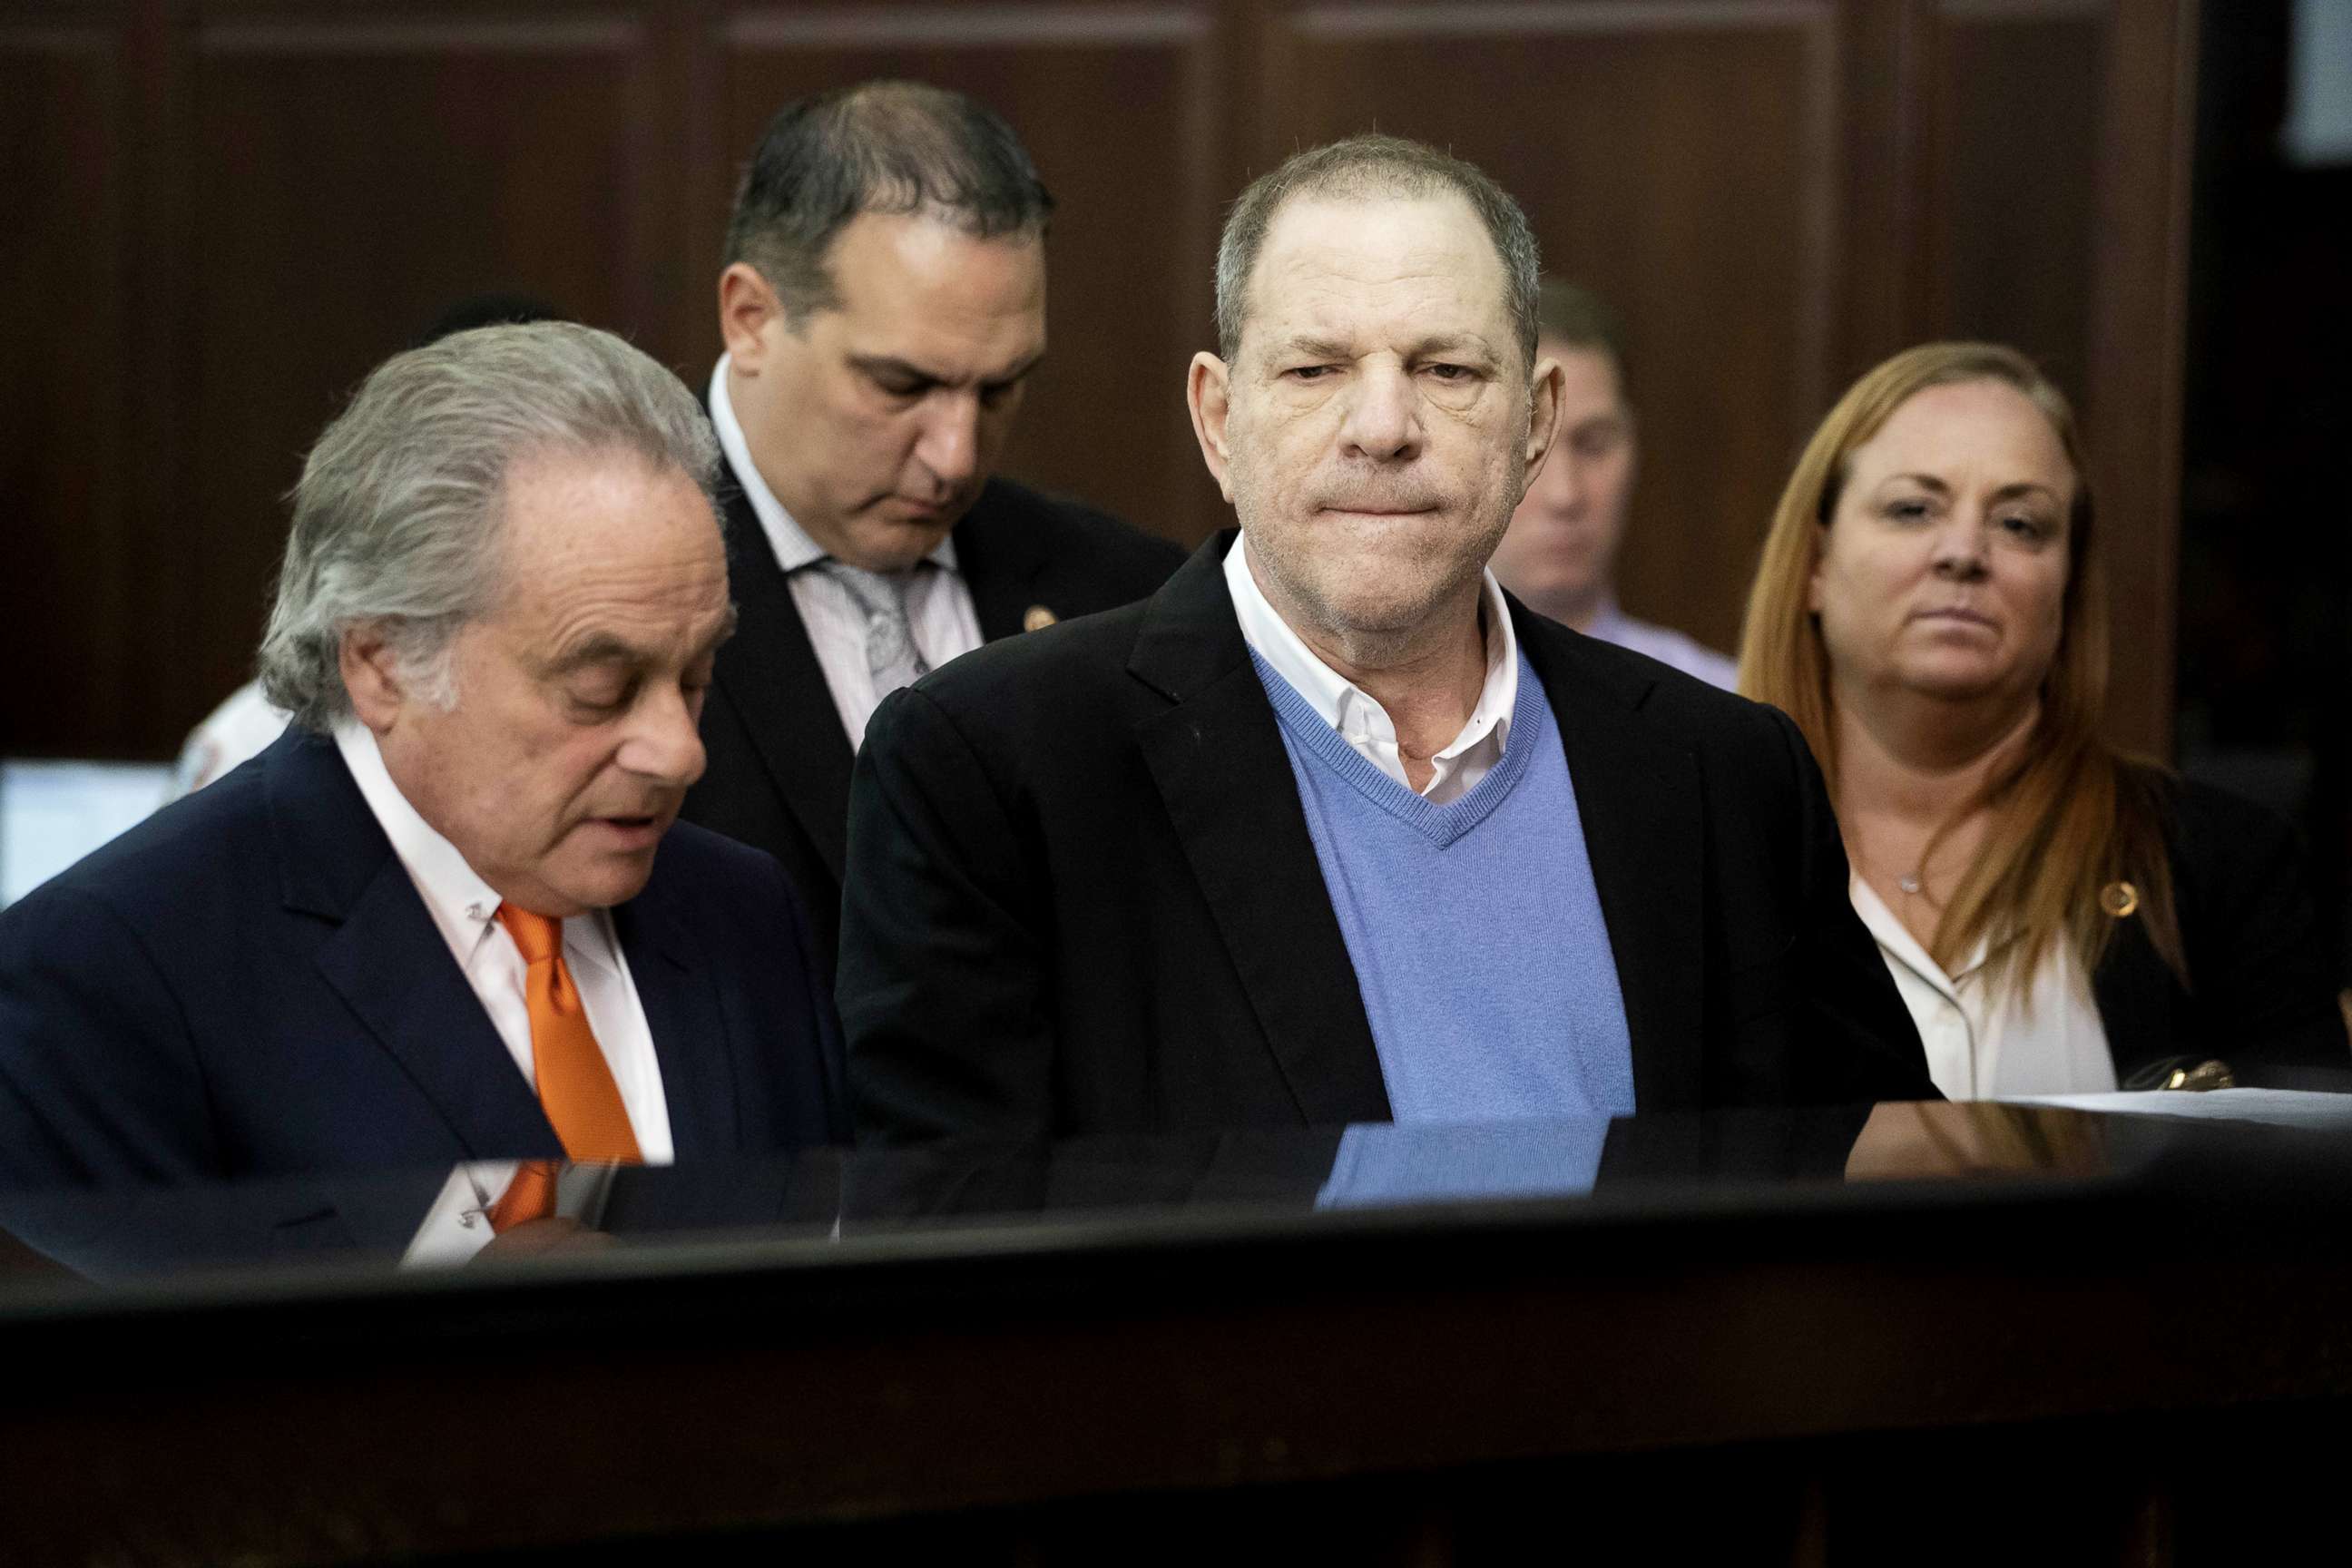 PHOTO: Harvey Weinstein along with his attorney Benjamin Brafman, left, appears at his arraignment in Manhattan Criminal Court, May 25, 2018.